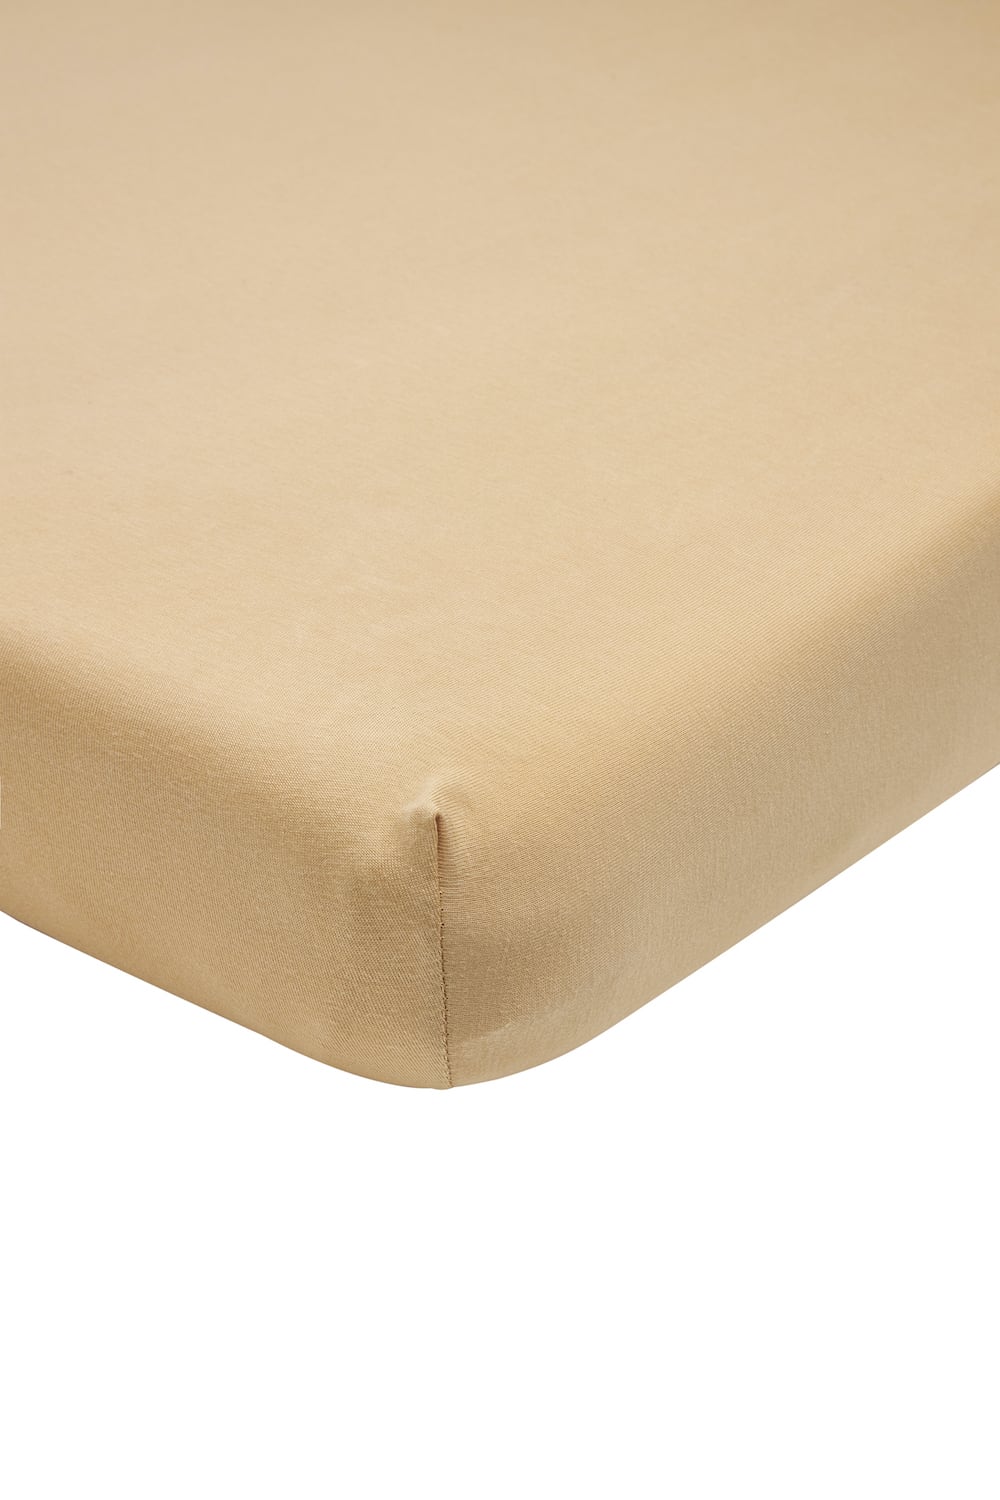 Hoeslaken 2-persoons Basic Jersey Warm Sand (160x210/220cm)